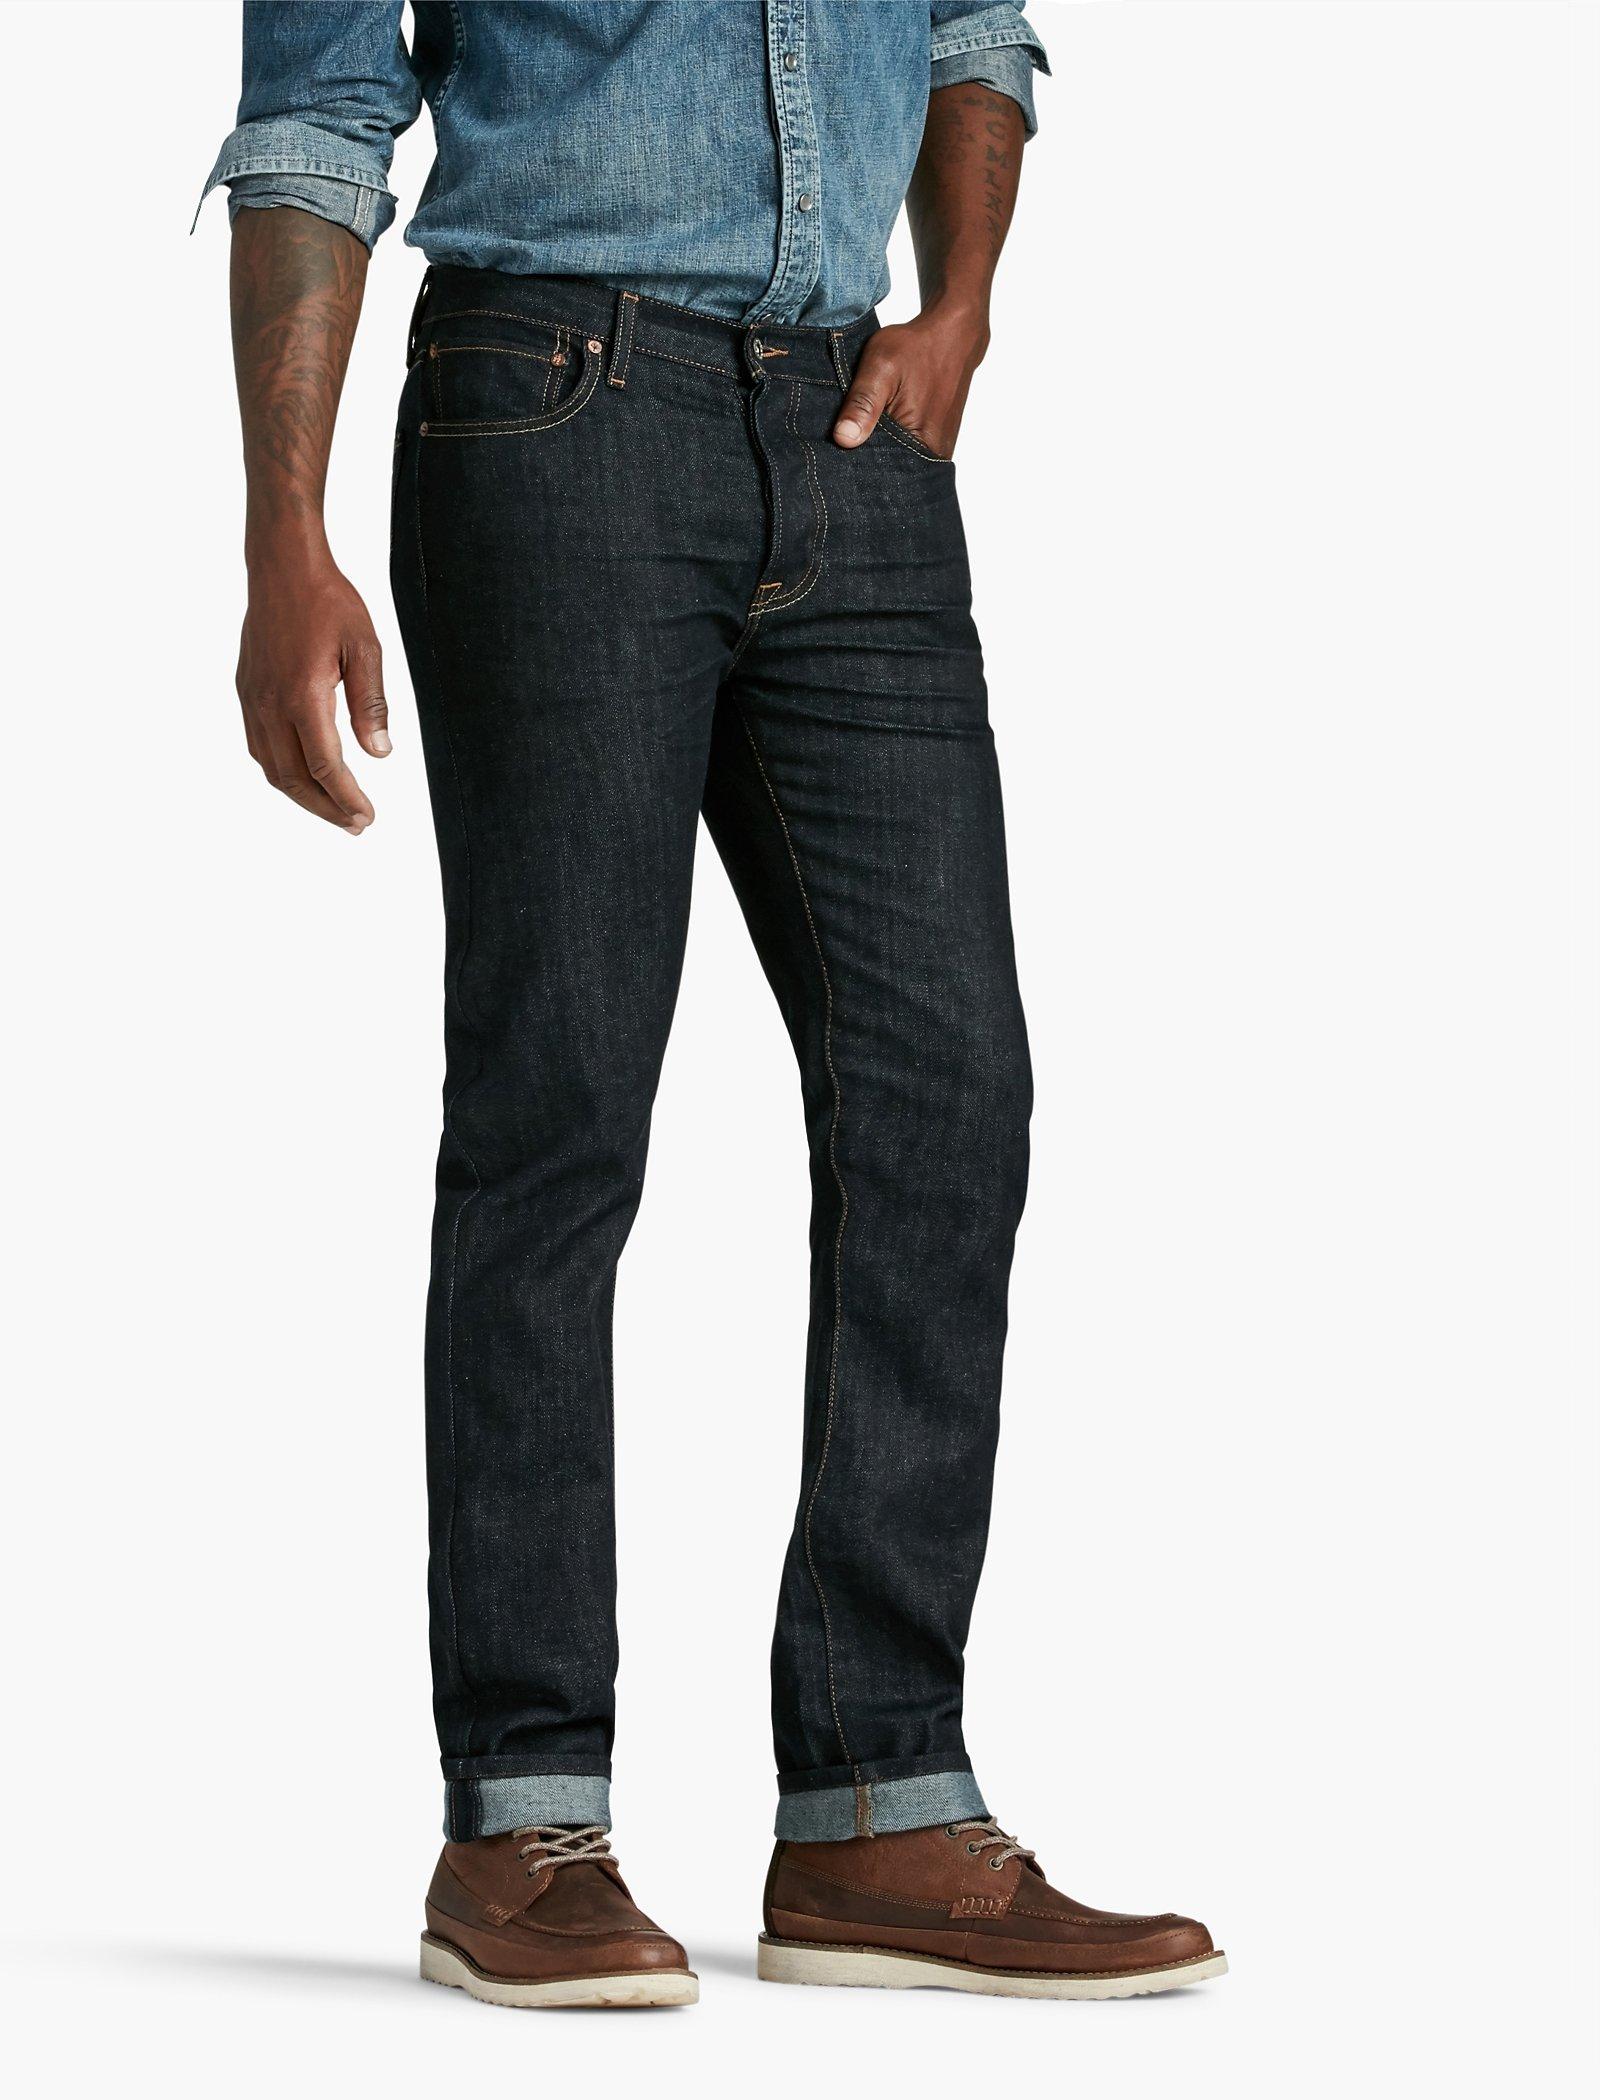 bootcut jeans body type